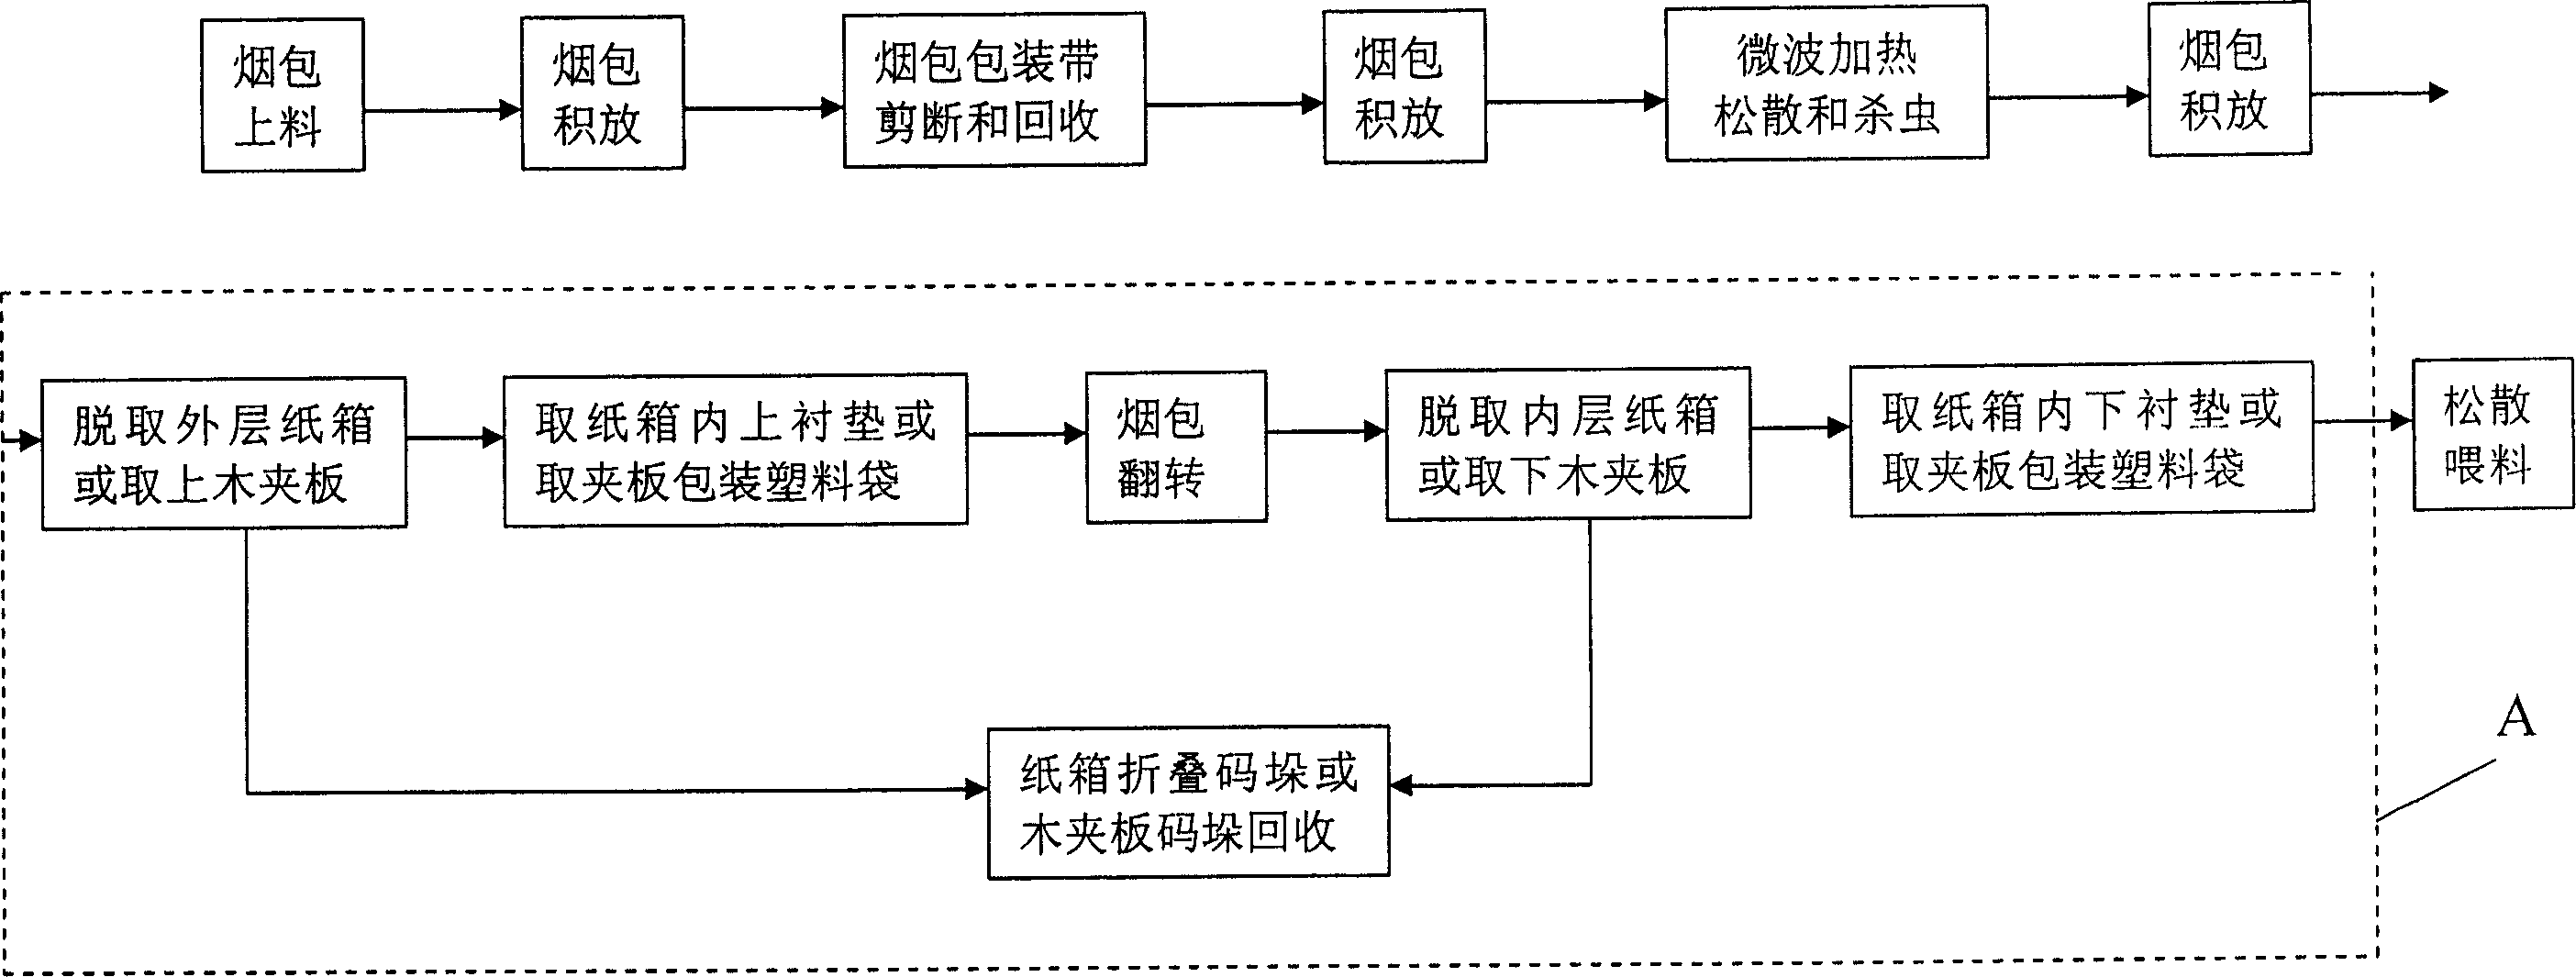 Tobacco leaf cut-tobacco-making pretreating process and production line